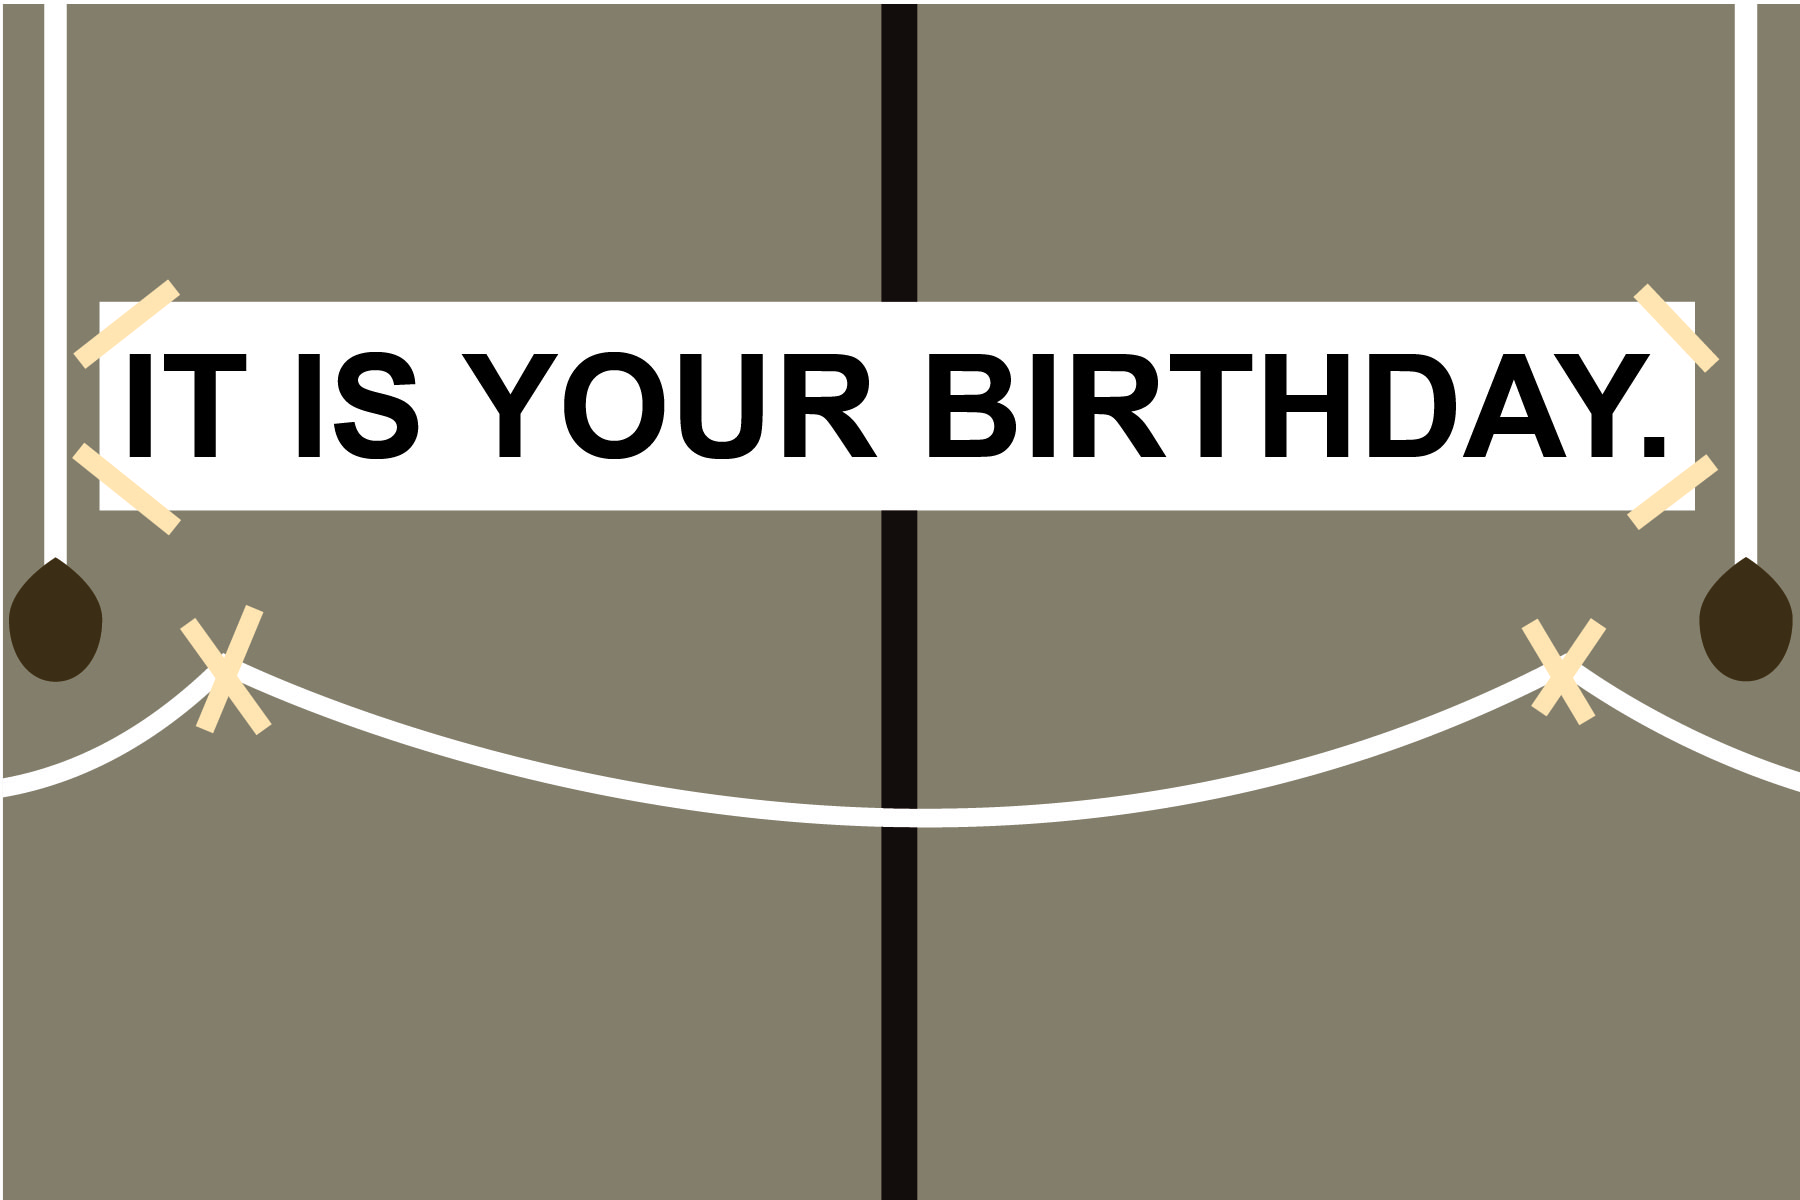 It is Your Birthday